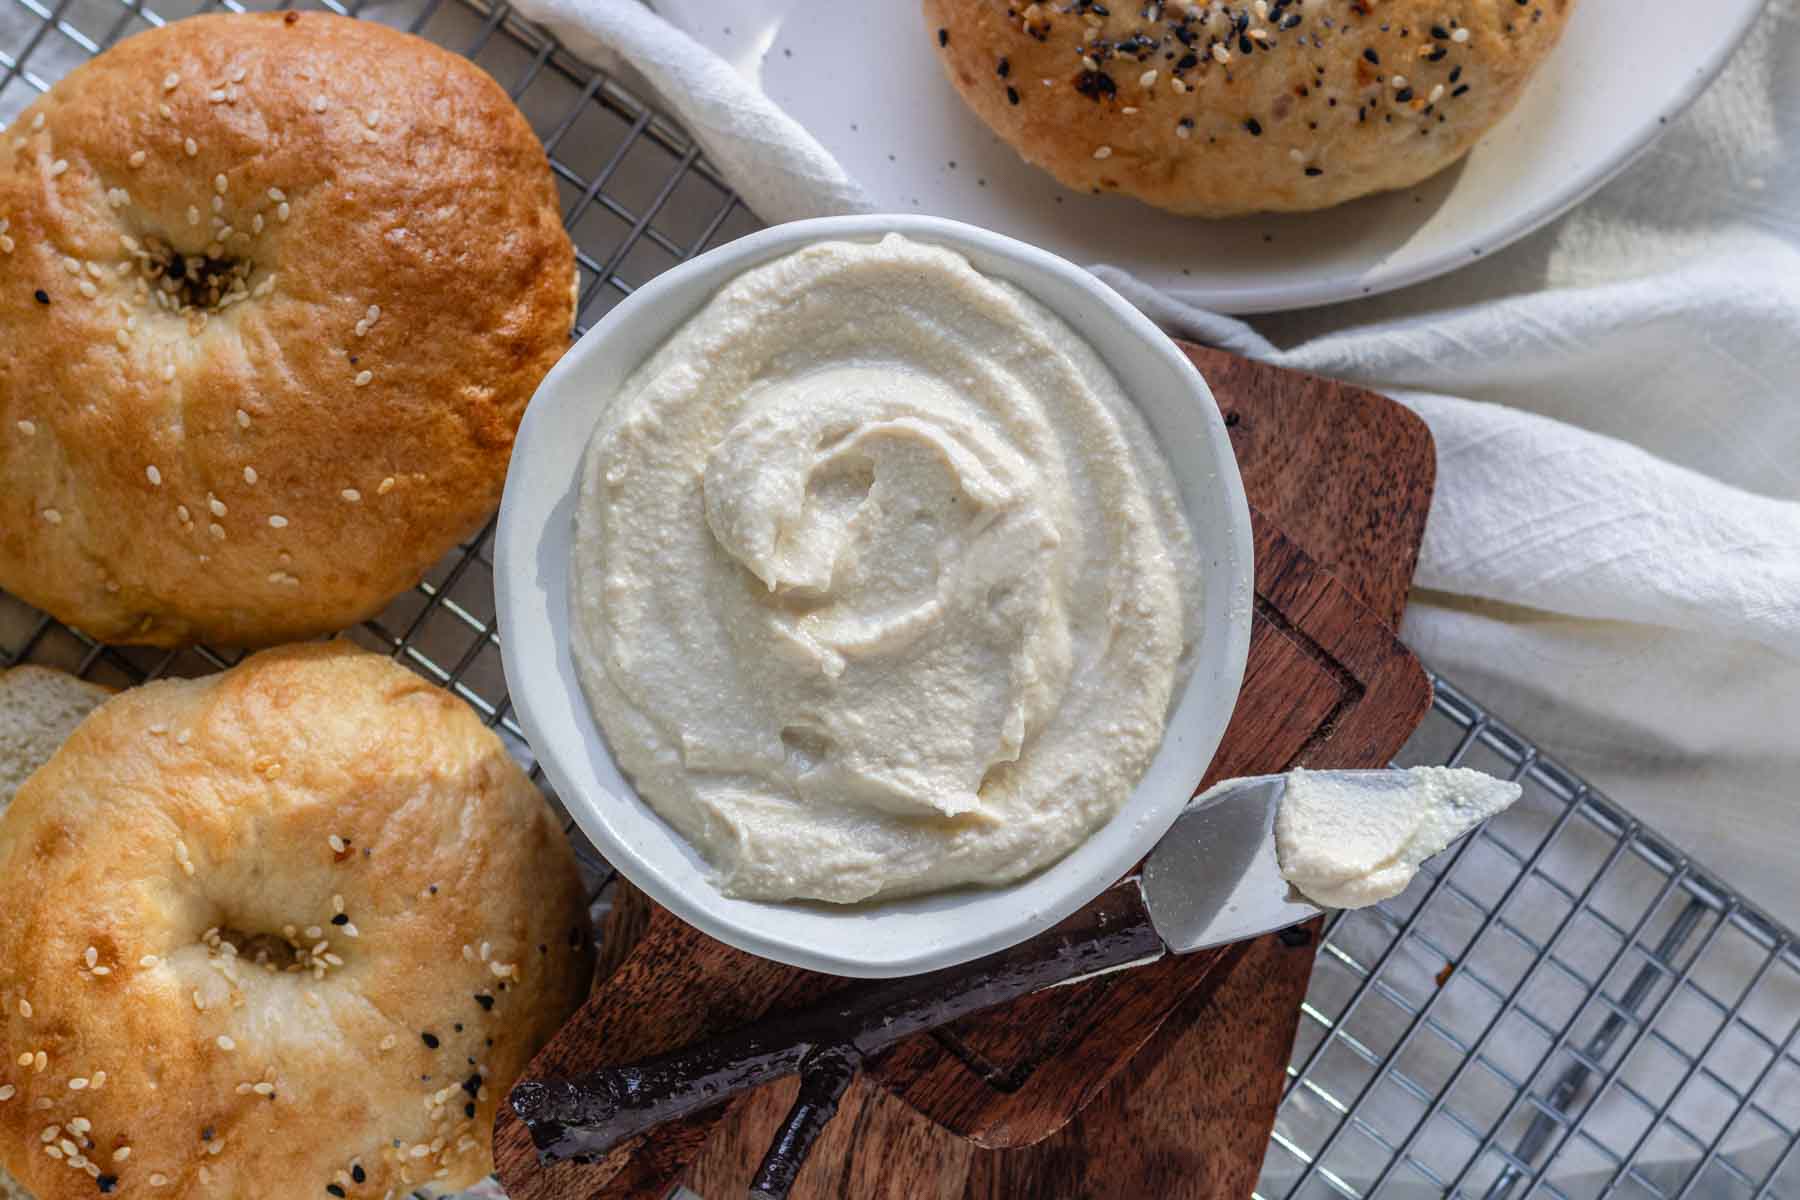 Vegan cream cheese in a bowl on a wooden board beside bagels.